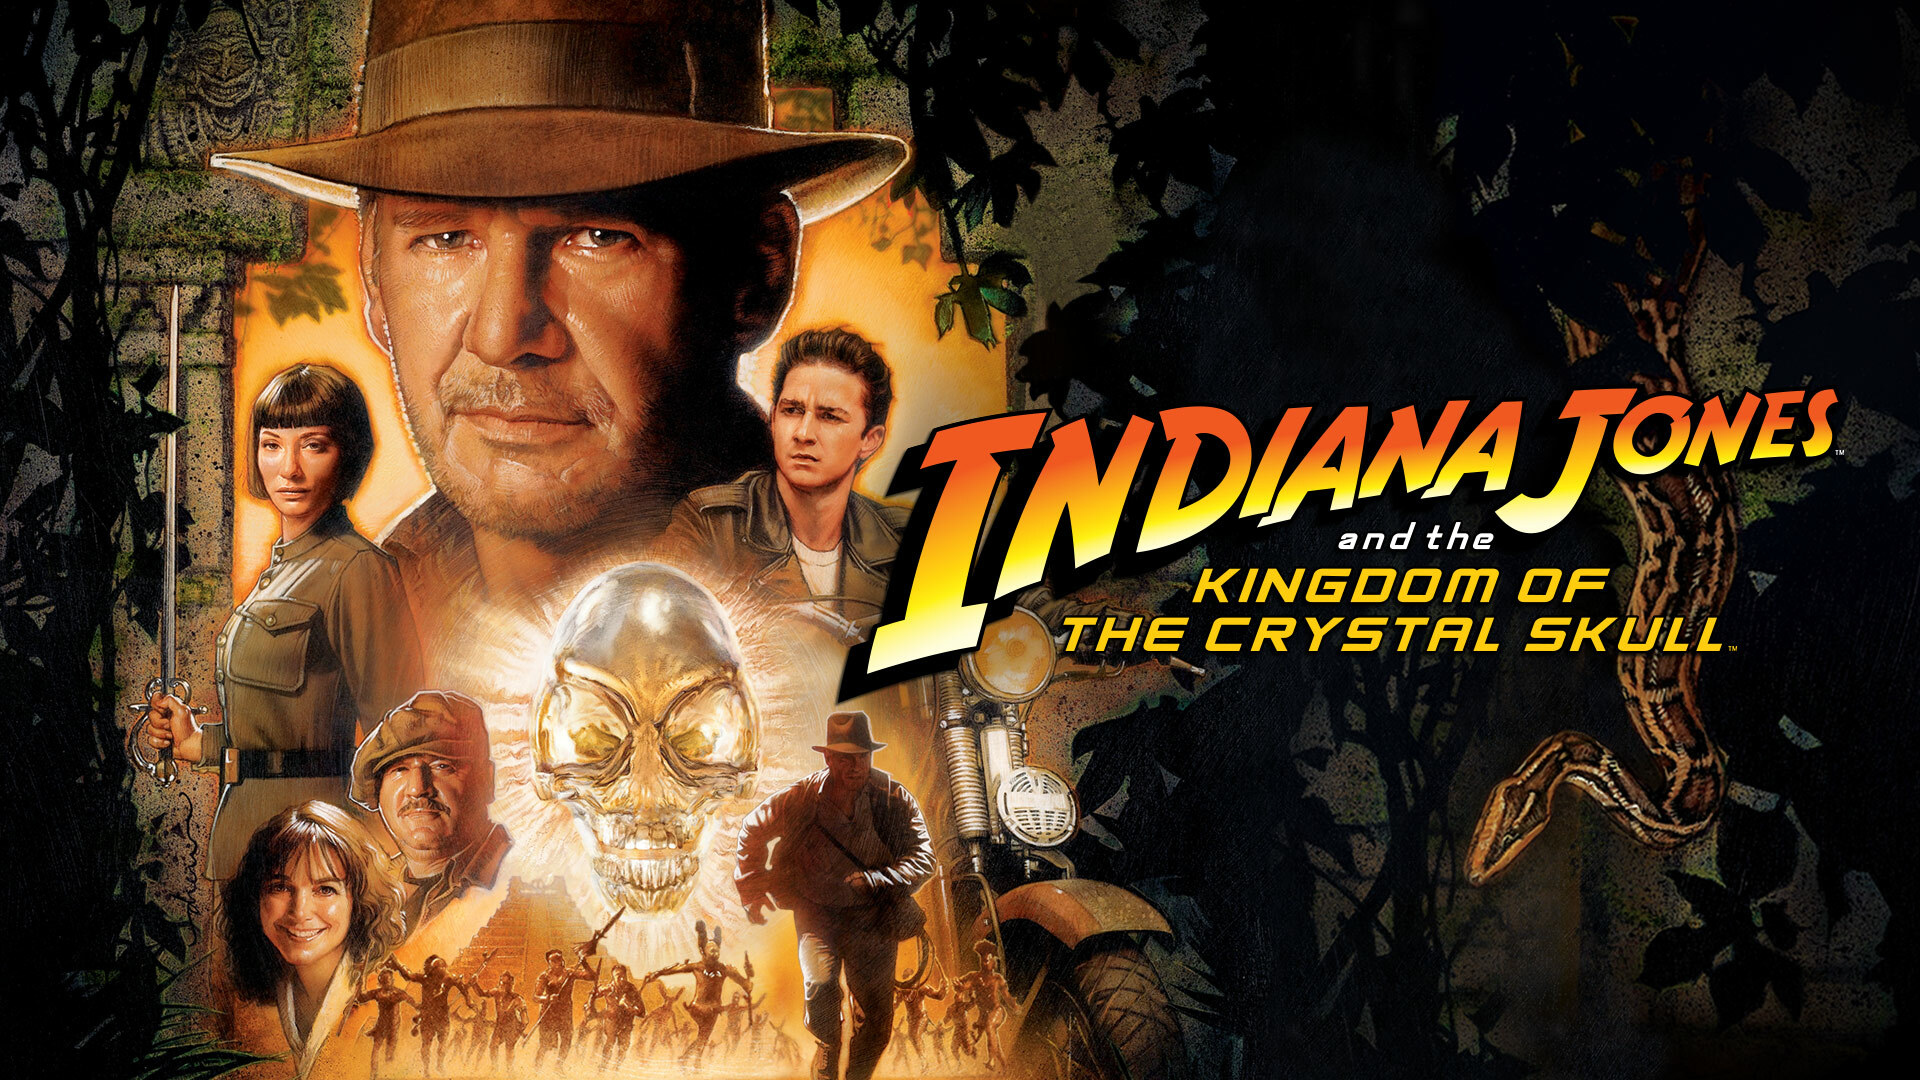 Indiana Jones and the Kingdom of the Crystal Skull (2008) screens in 35mm  February 25th & 26th as part of our month-long Indiana Jones…